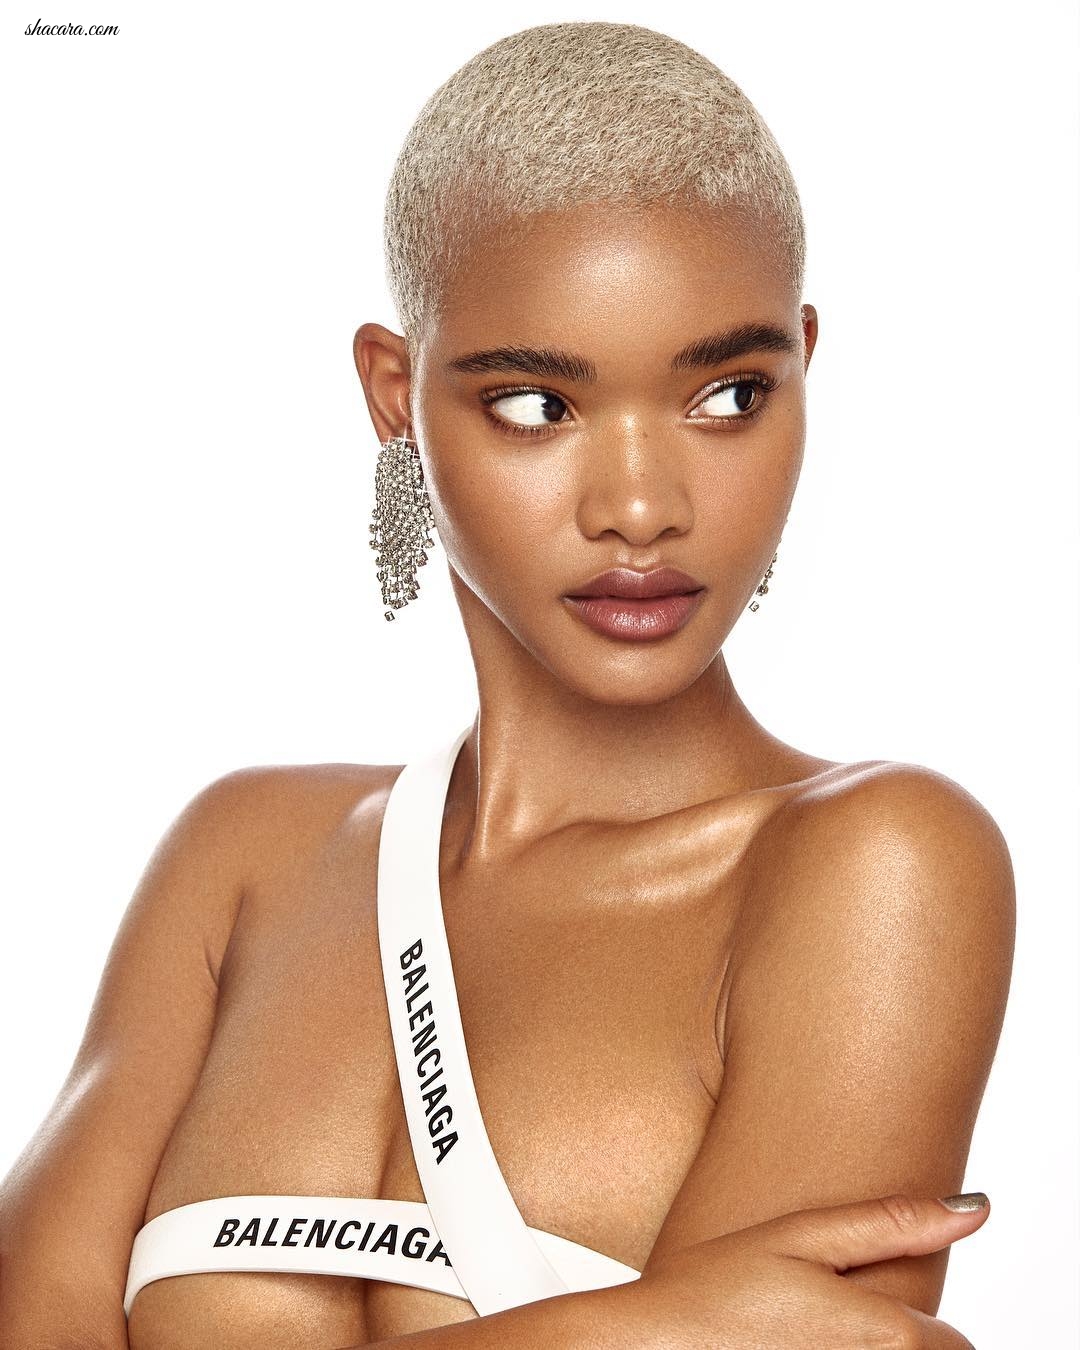 #MODELCRUSH: She Is Definitely One Of The Most Beautiful Models Out There’ Meet Victoria’s Secret Model Iesha Hodges